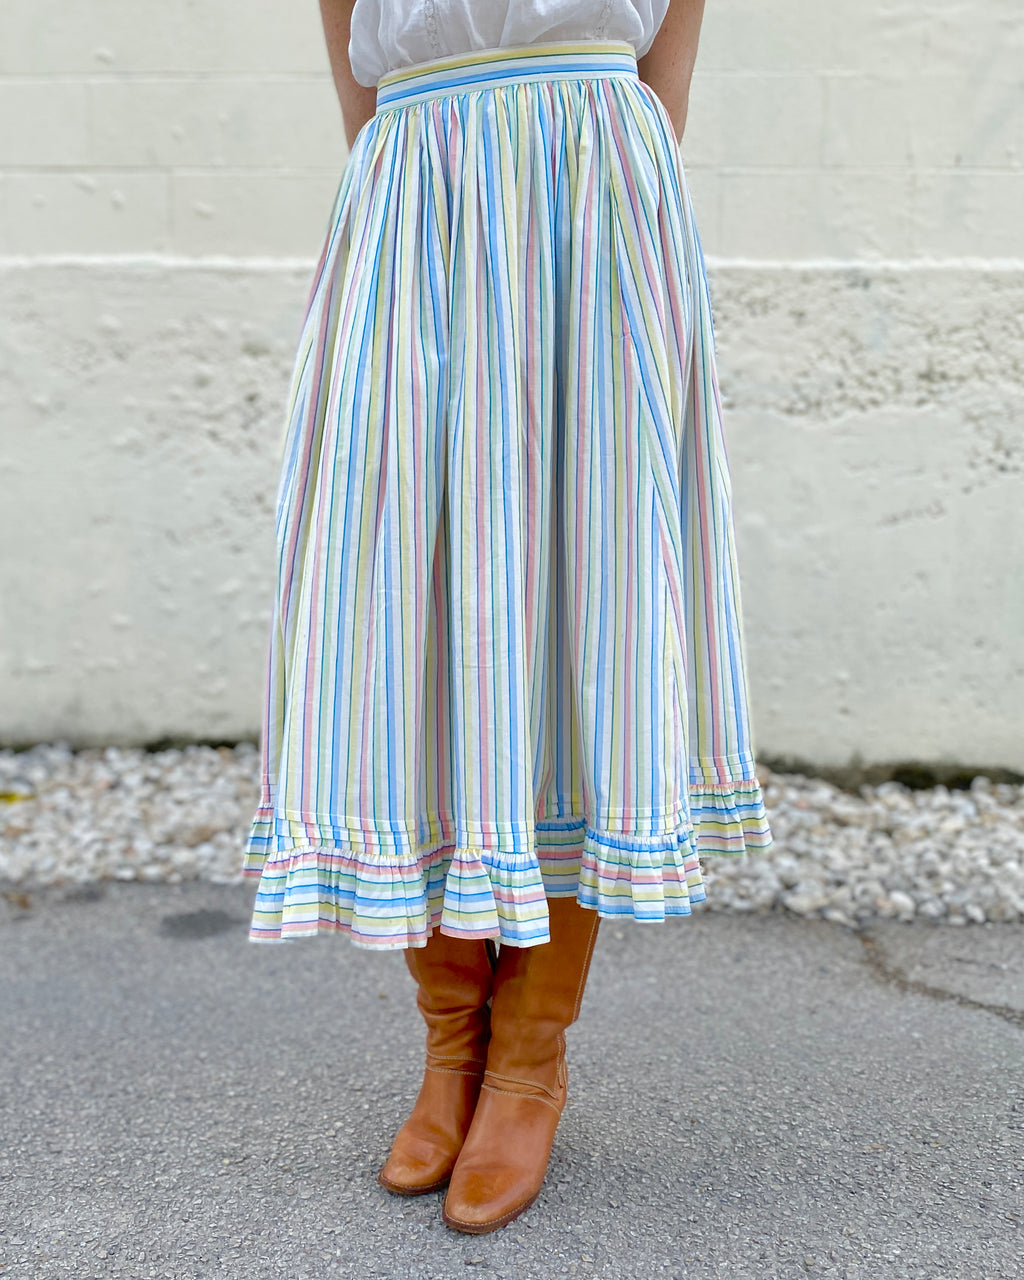 Cotton Candy Laura Ashley Pastel Striped Skirt